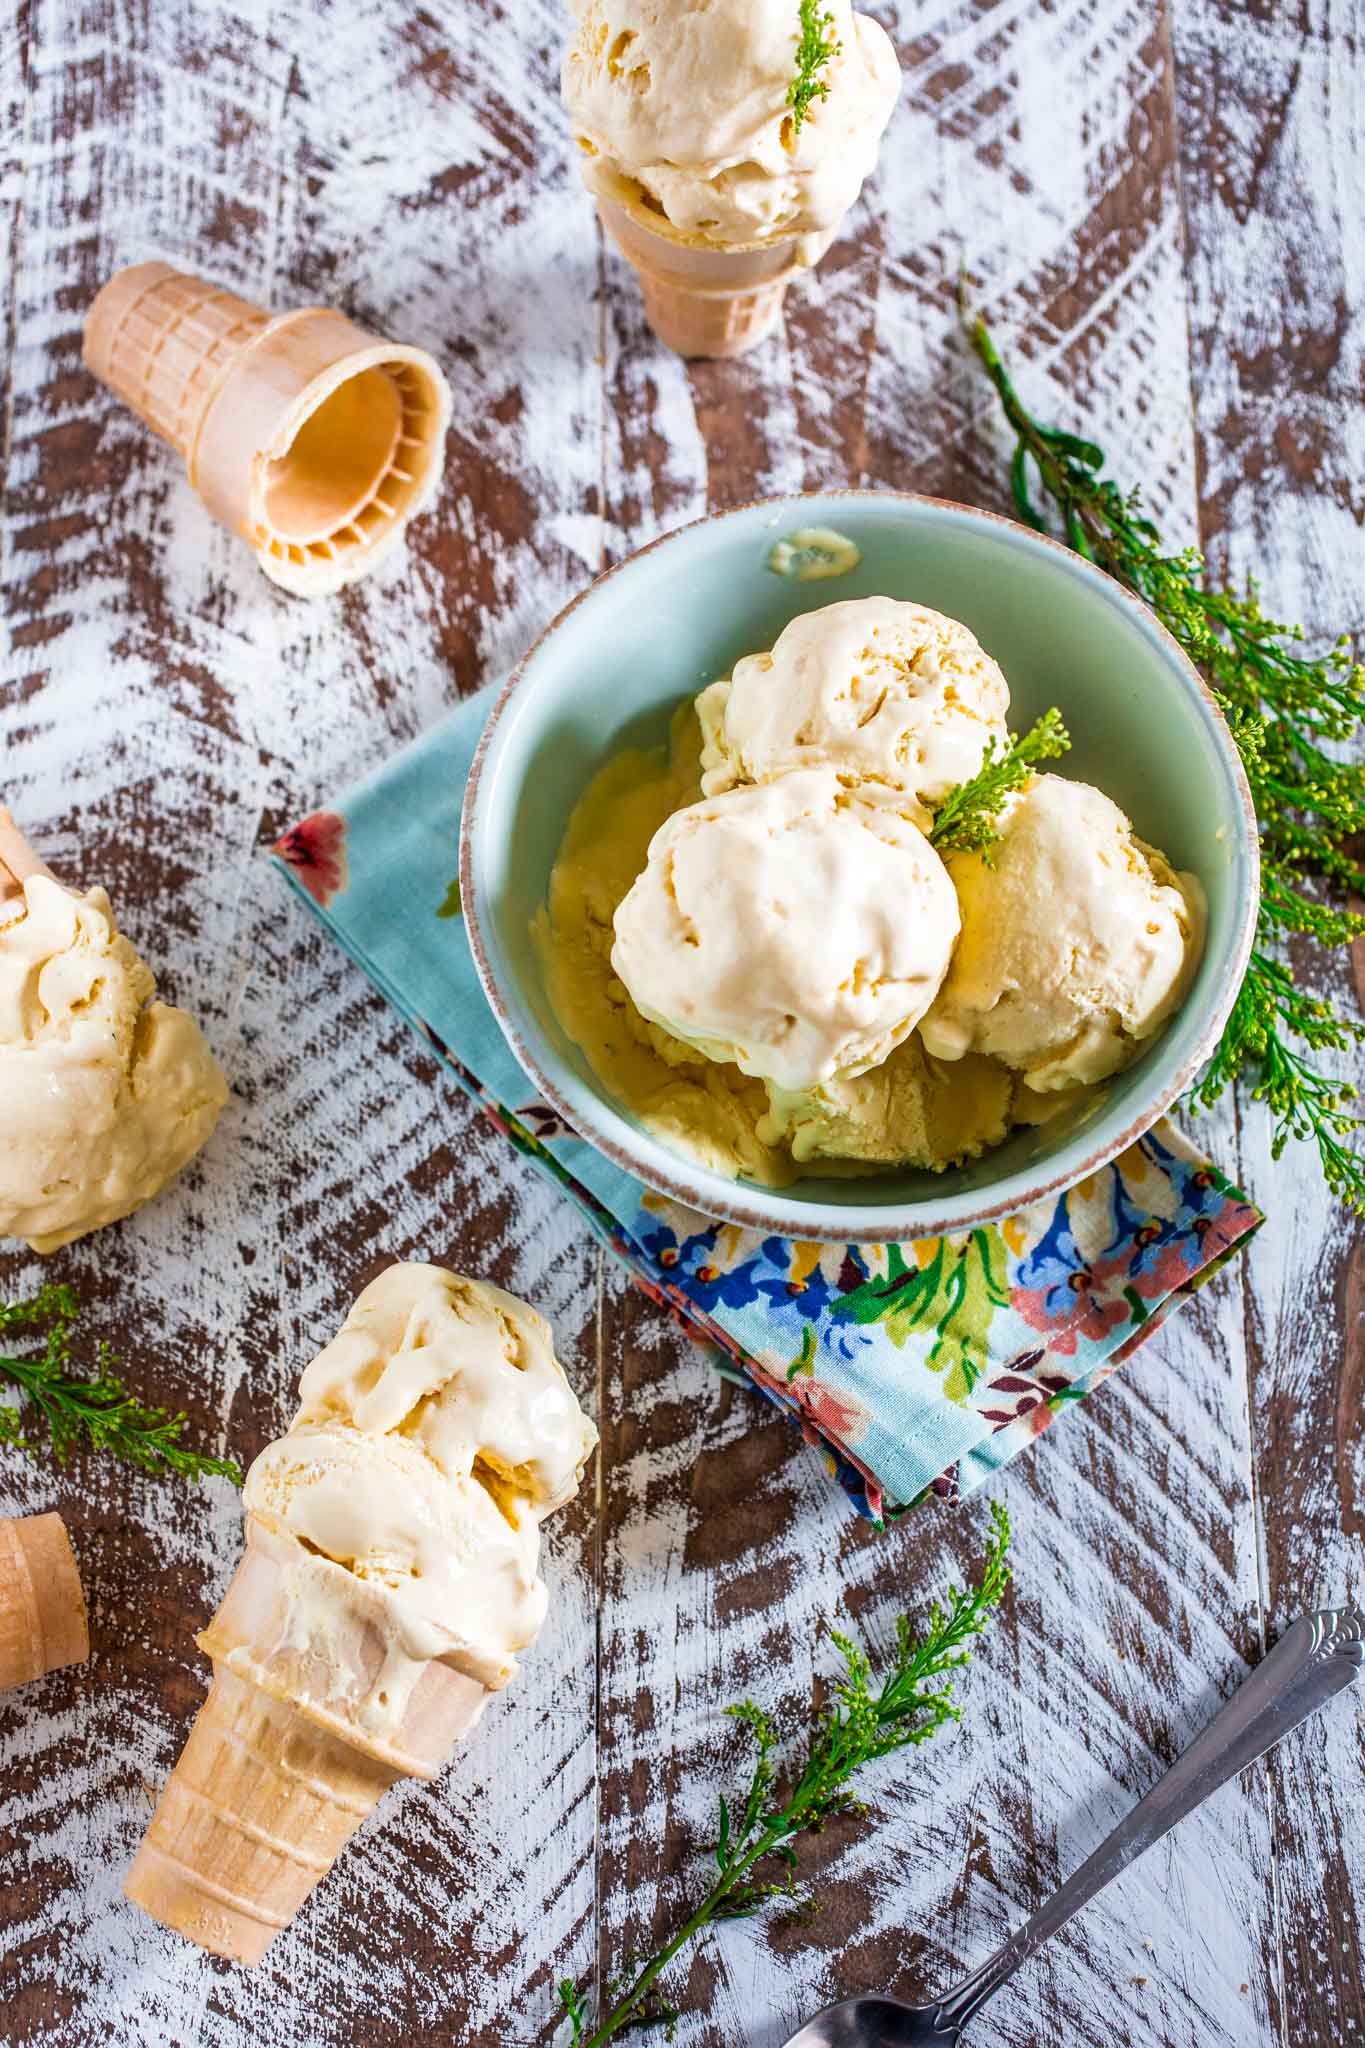 Passion Fruit Ice Cream | www.oliviascuisine.com | A no-churn ice cream recipe that is sweet, tart, creamy and oh so tropical! :) The perfect frozen treat for a hot summer day!